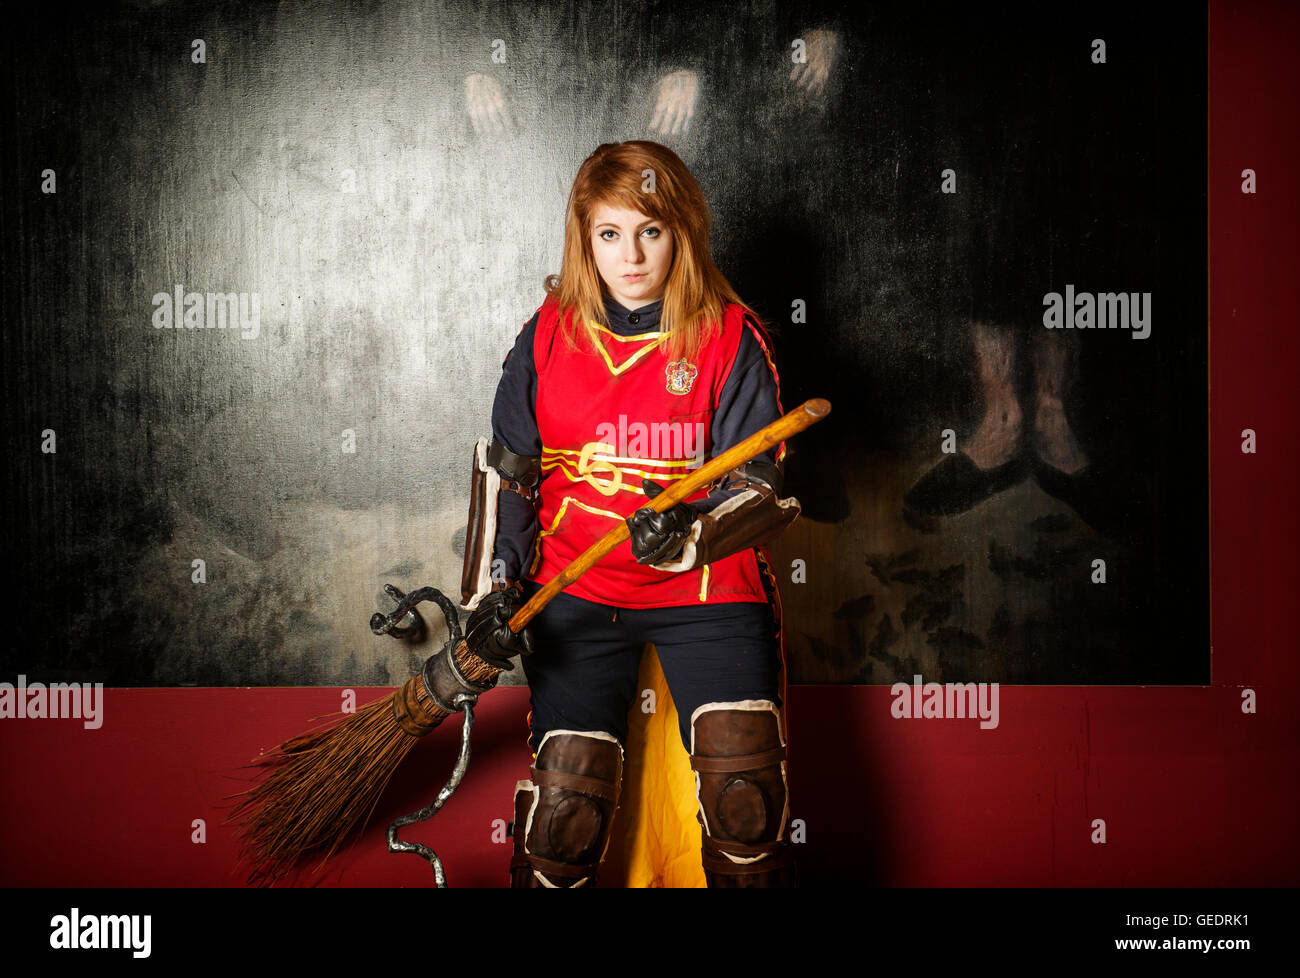 Cosplayer dressed as a Quidditch player from the Harry potter films poses for photographs at a Comic Con convention. Stock Photo